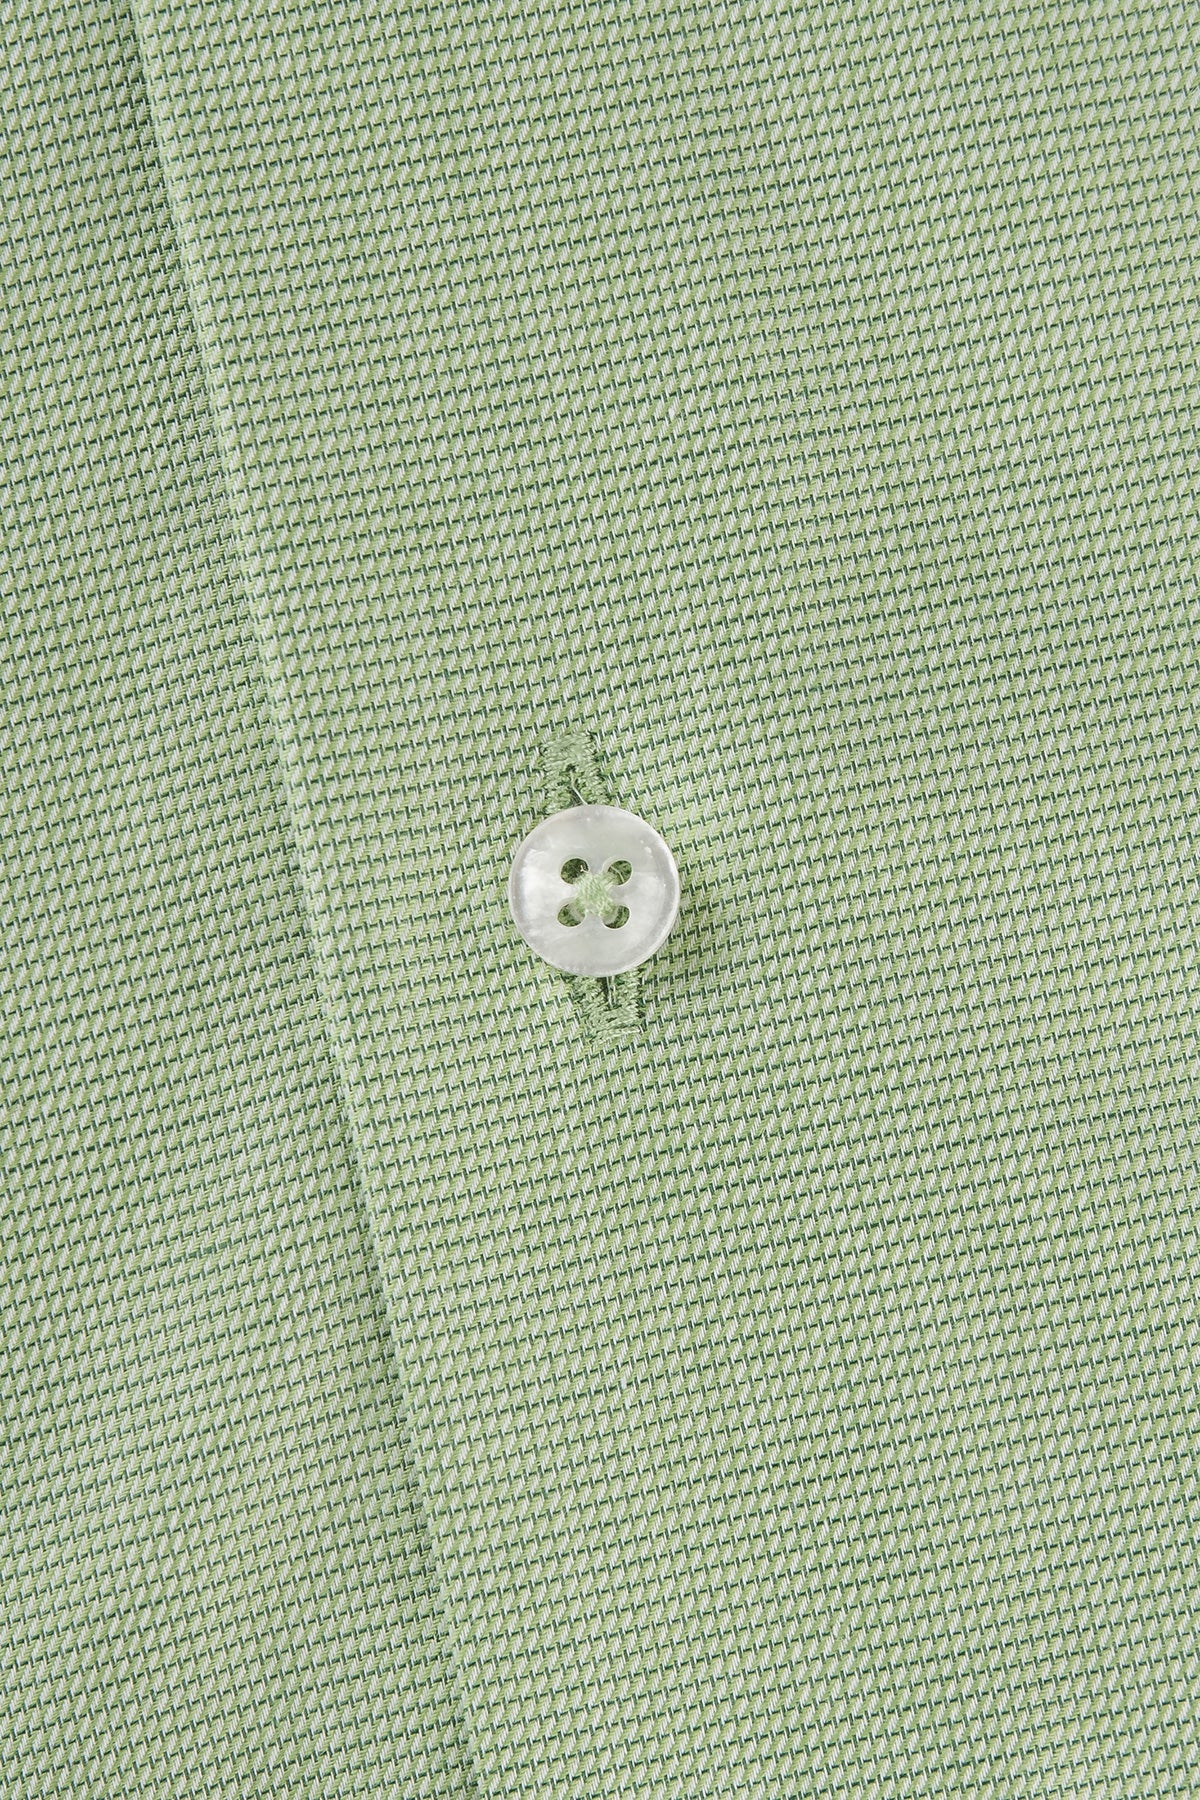 Green regular fit shirt with contrast details